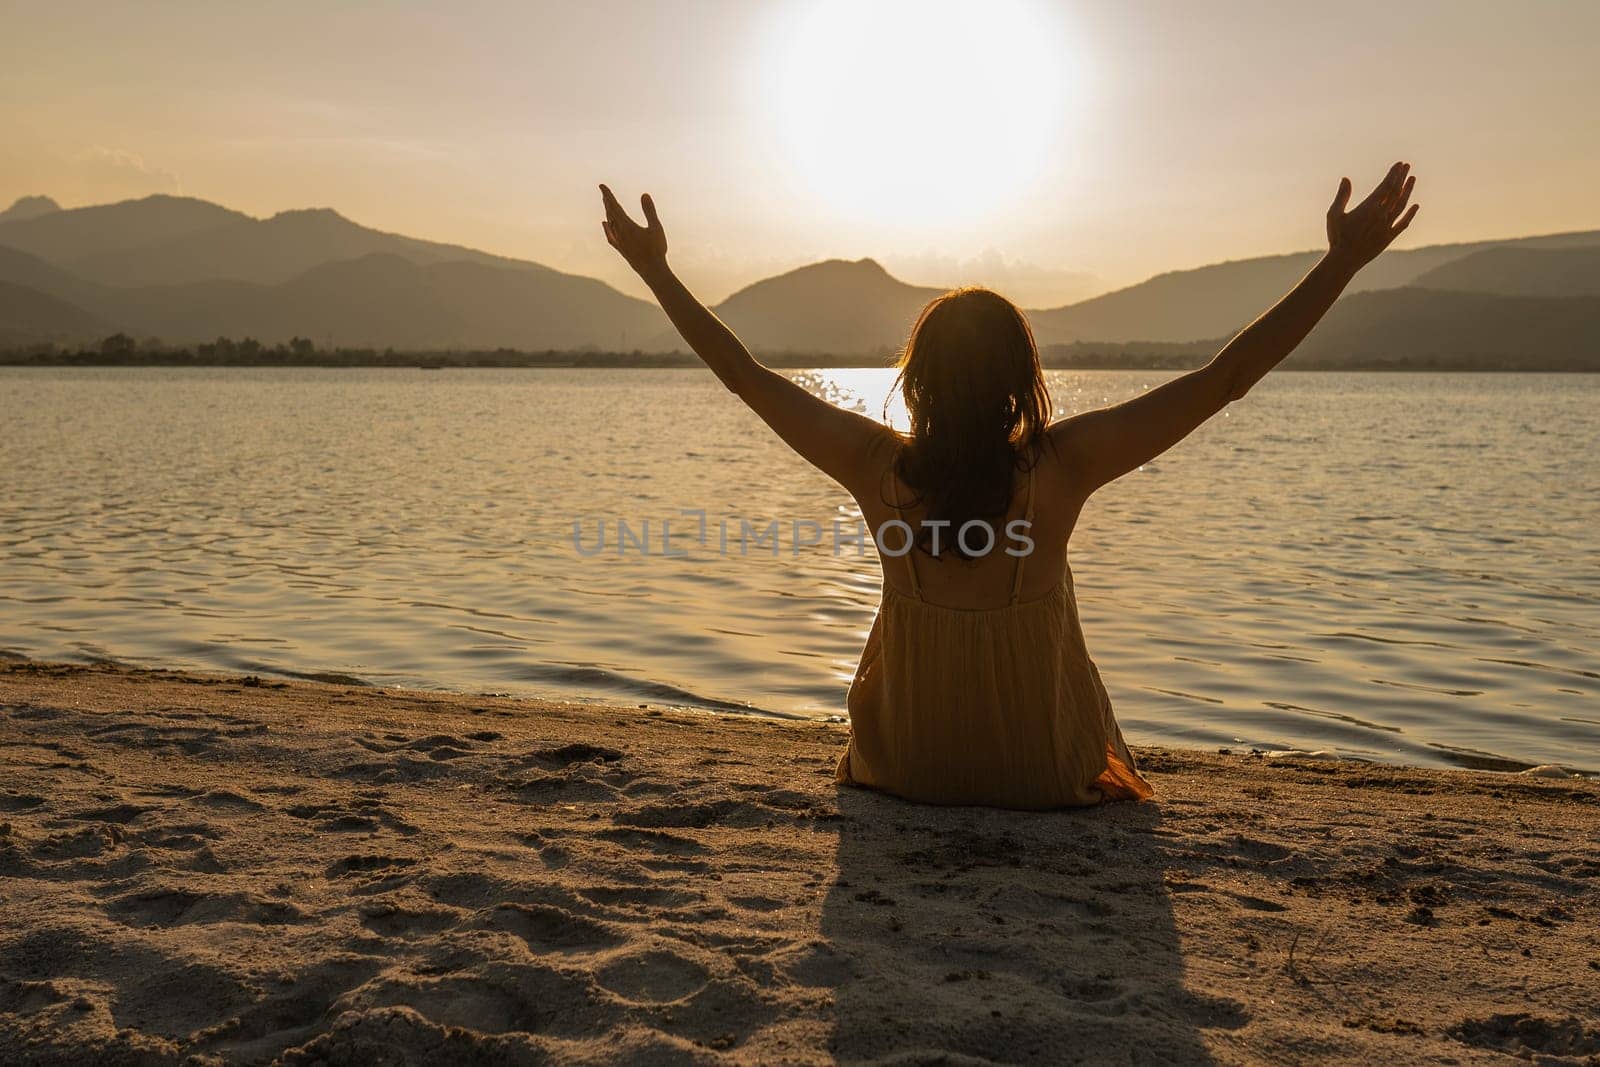 Evocative shot: woman in contemplative pose sitting on the sand with arms wide, facing the sea at sunrise or sunset on a beach. Connect with nature. by robbyfontanesi